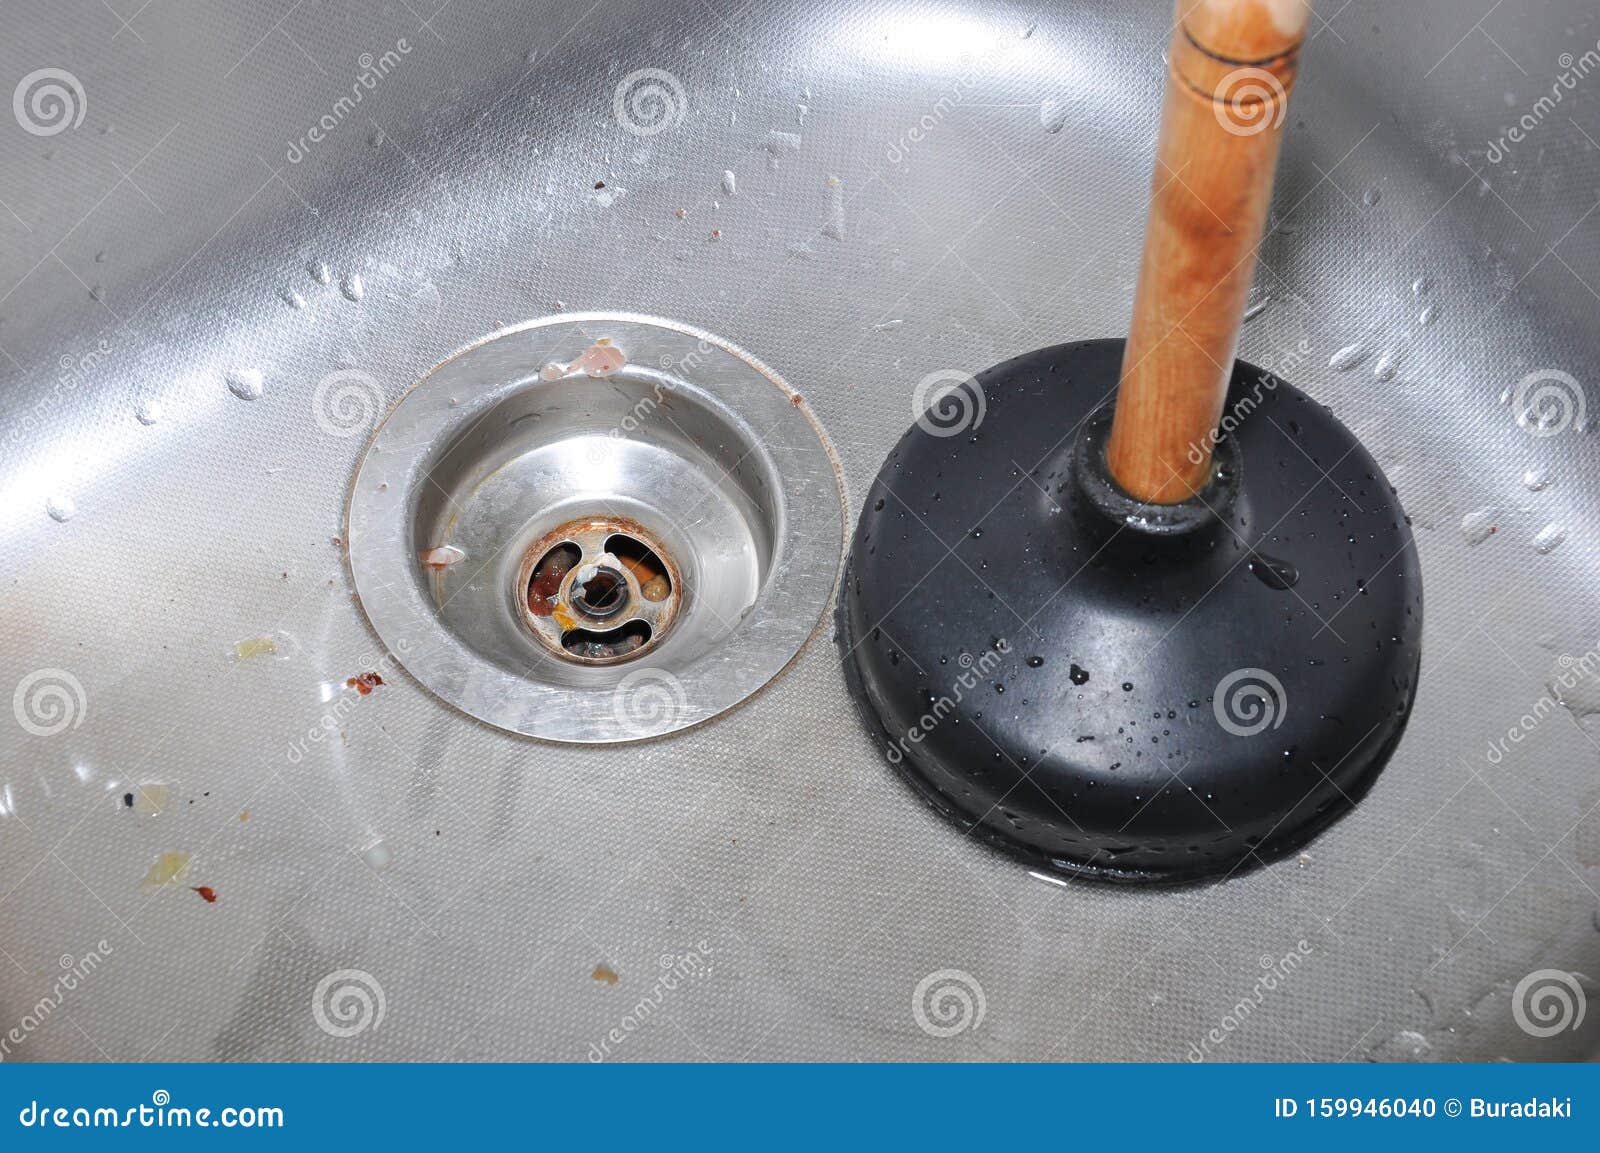 Plunger and kitchen sink stock photo. Image of cleaner ...